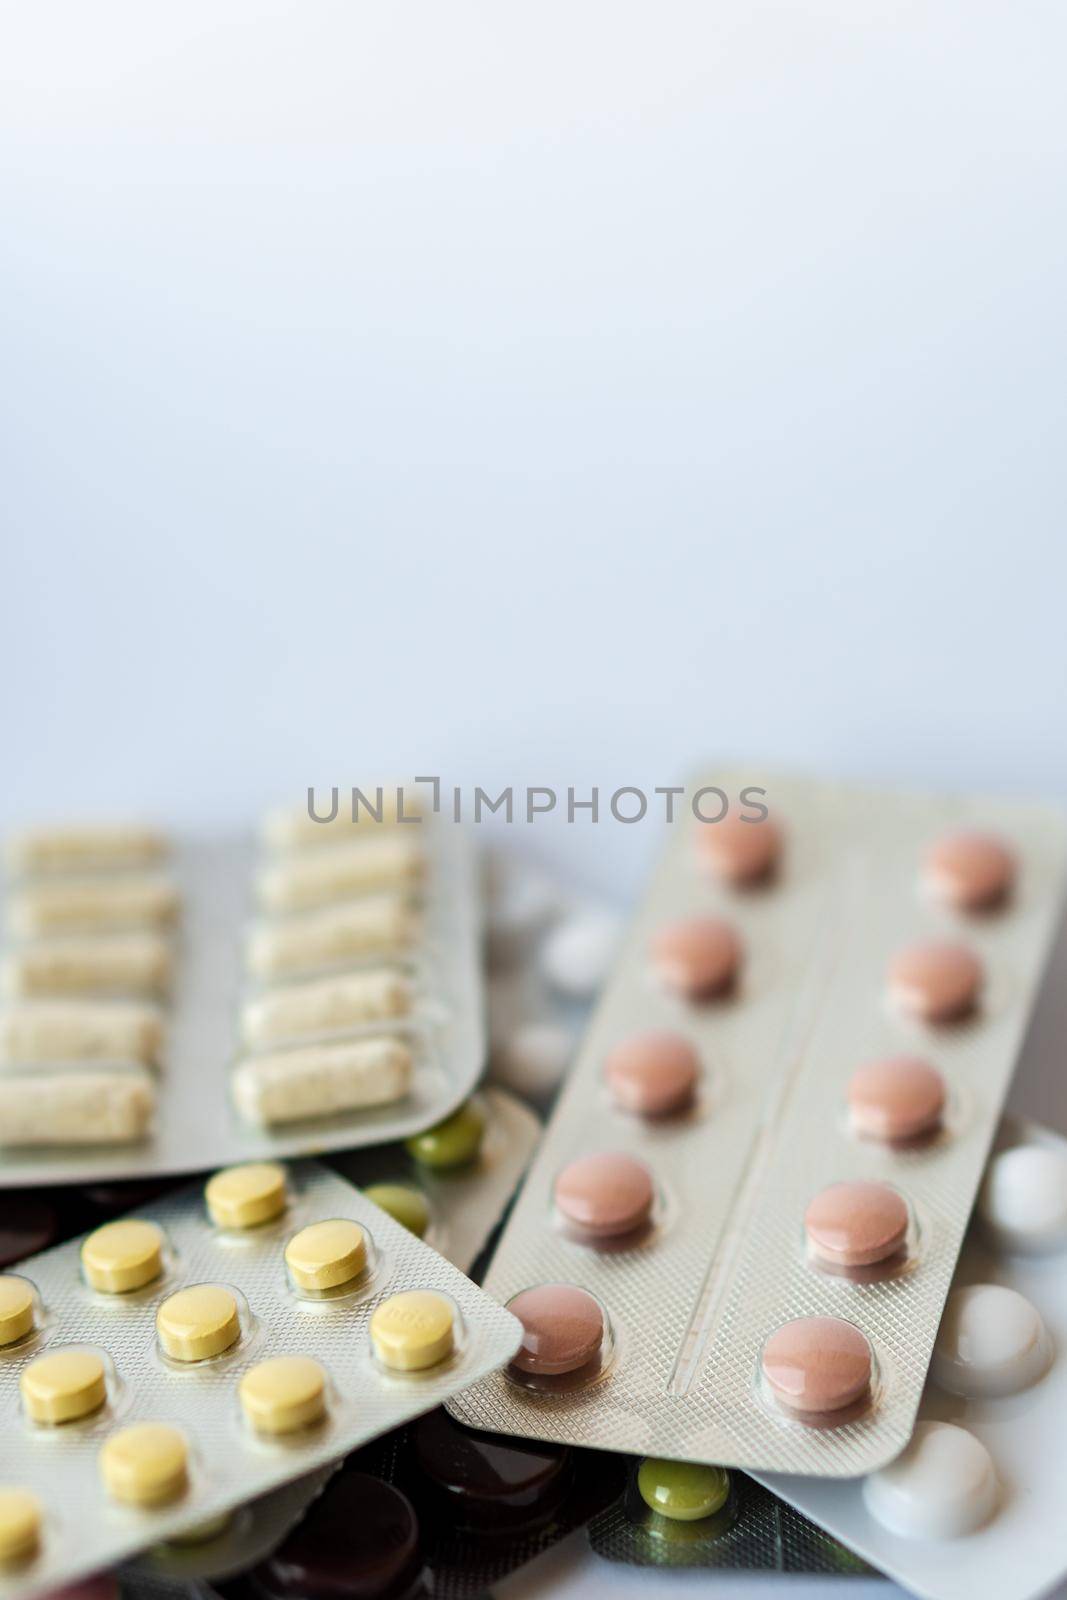 Medicine and pills. Multi-colored medicines on a white background close-up. Plate with multi-colored tablets on a white background. Multi-colored tablets that spilled from an inverted jar onto a white surface